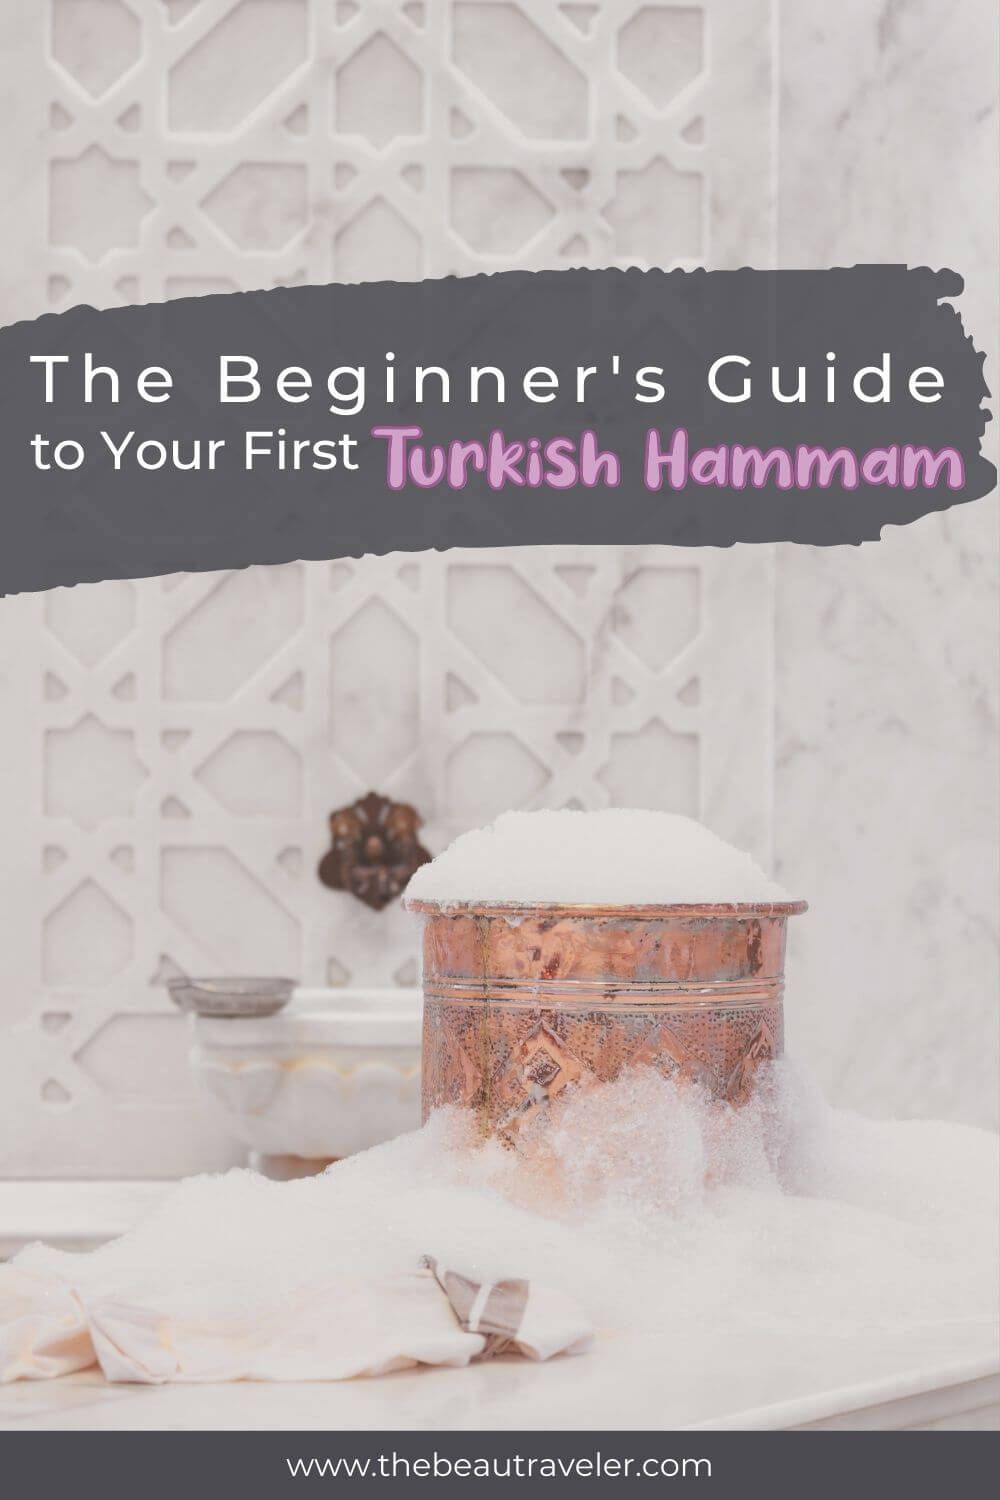 The Beginner's Guide to Your First Turkish Hammam - The BeauTraveler